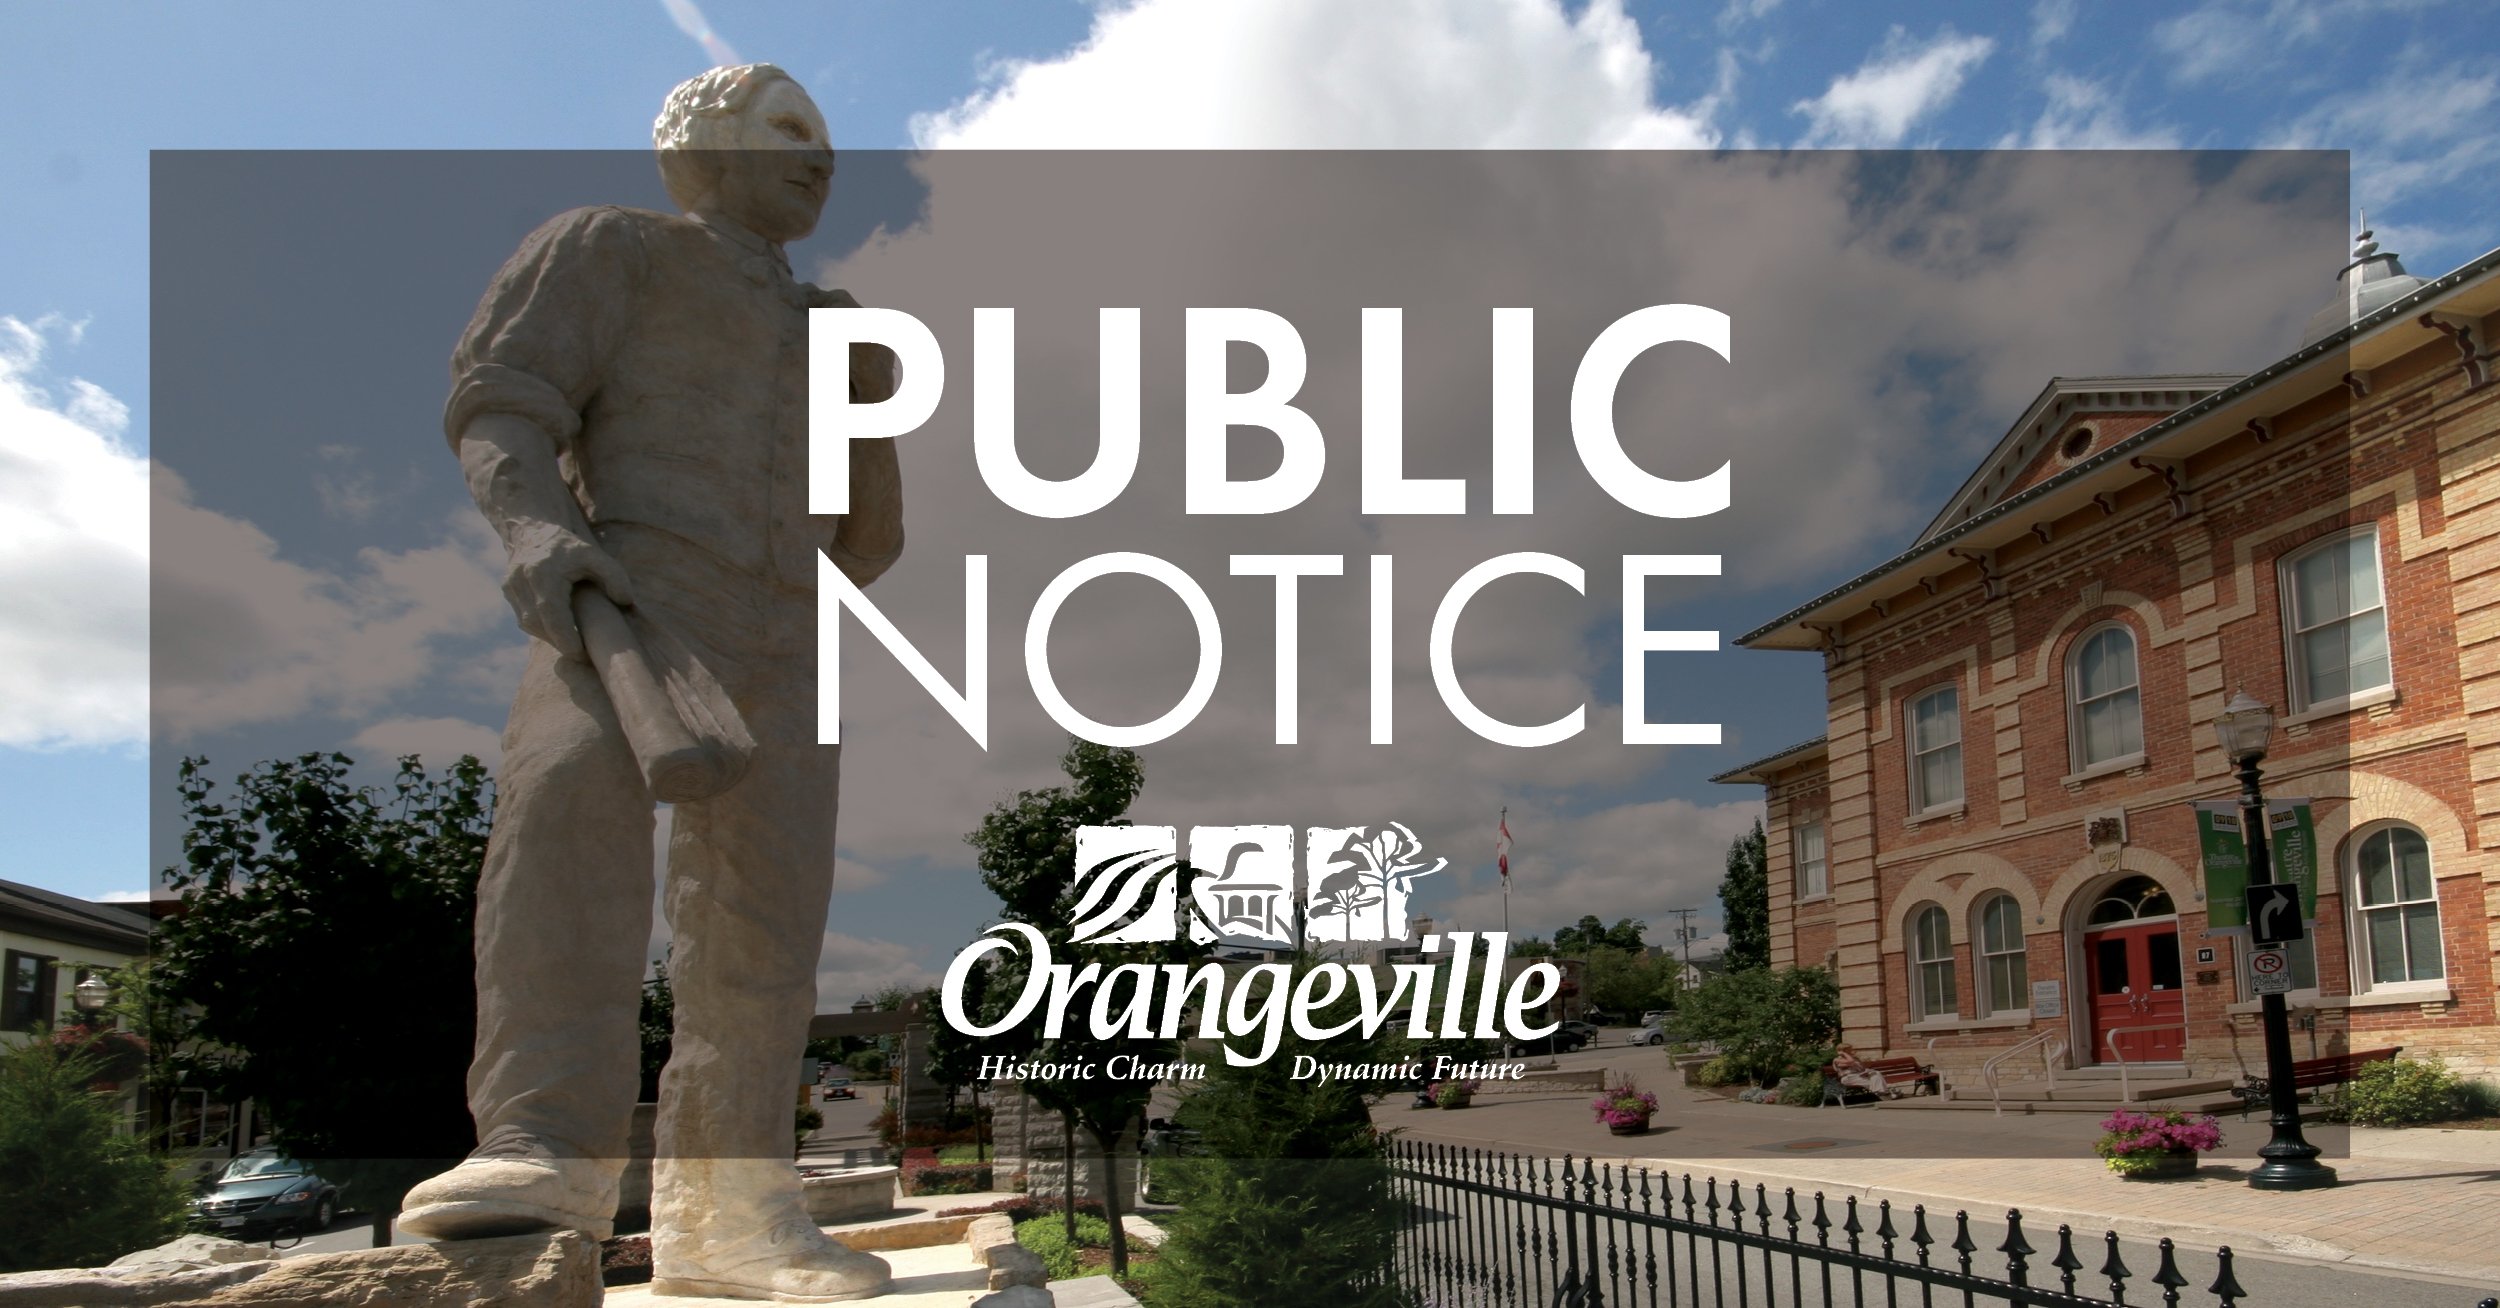 Public Notice photograph and text